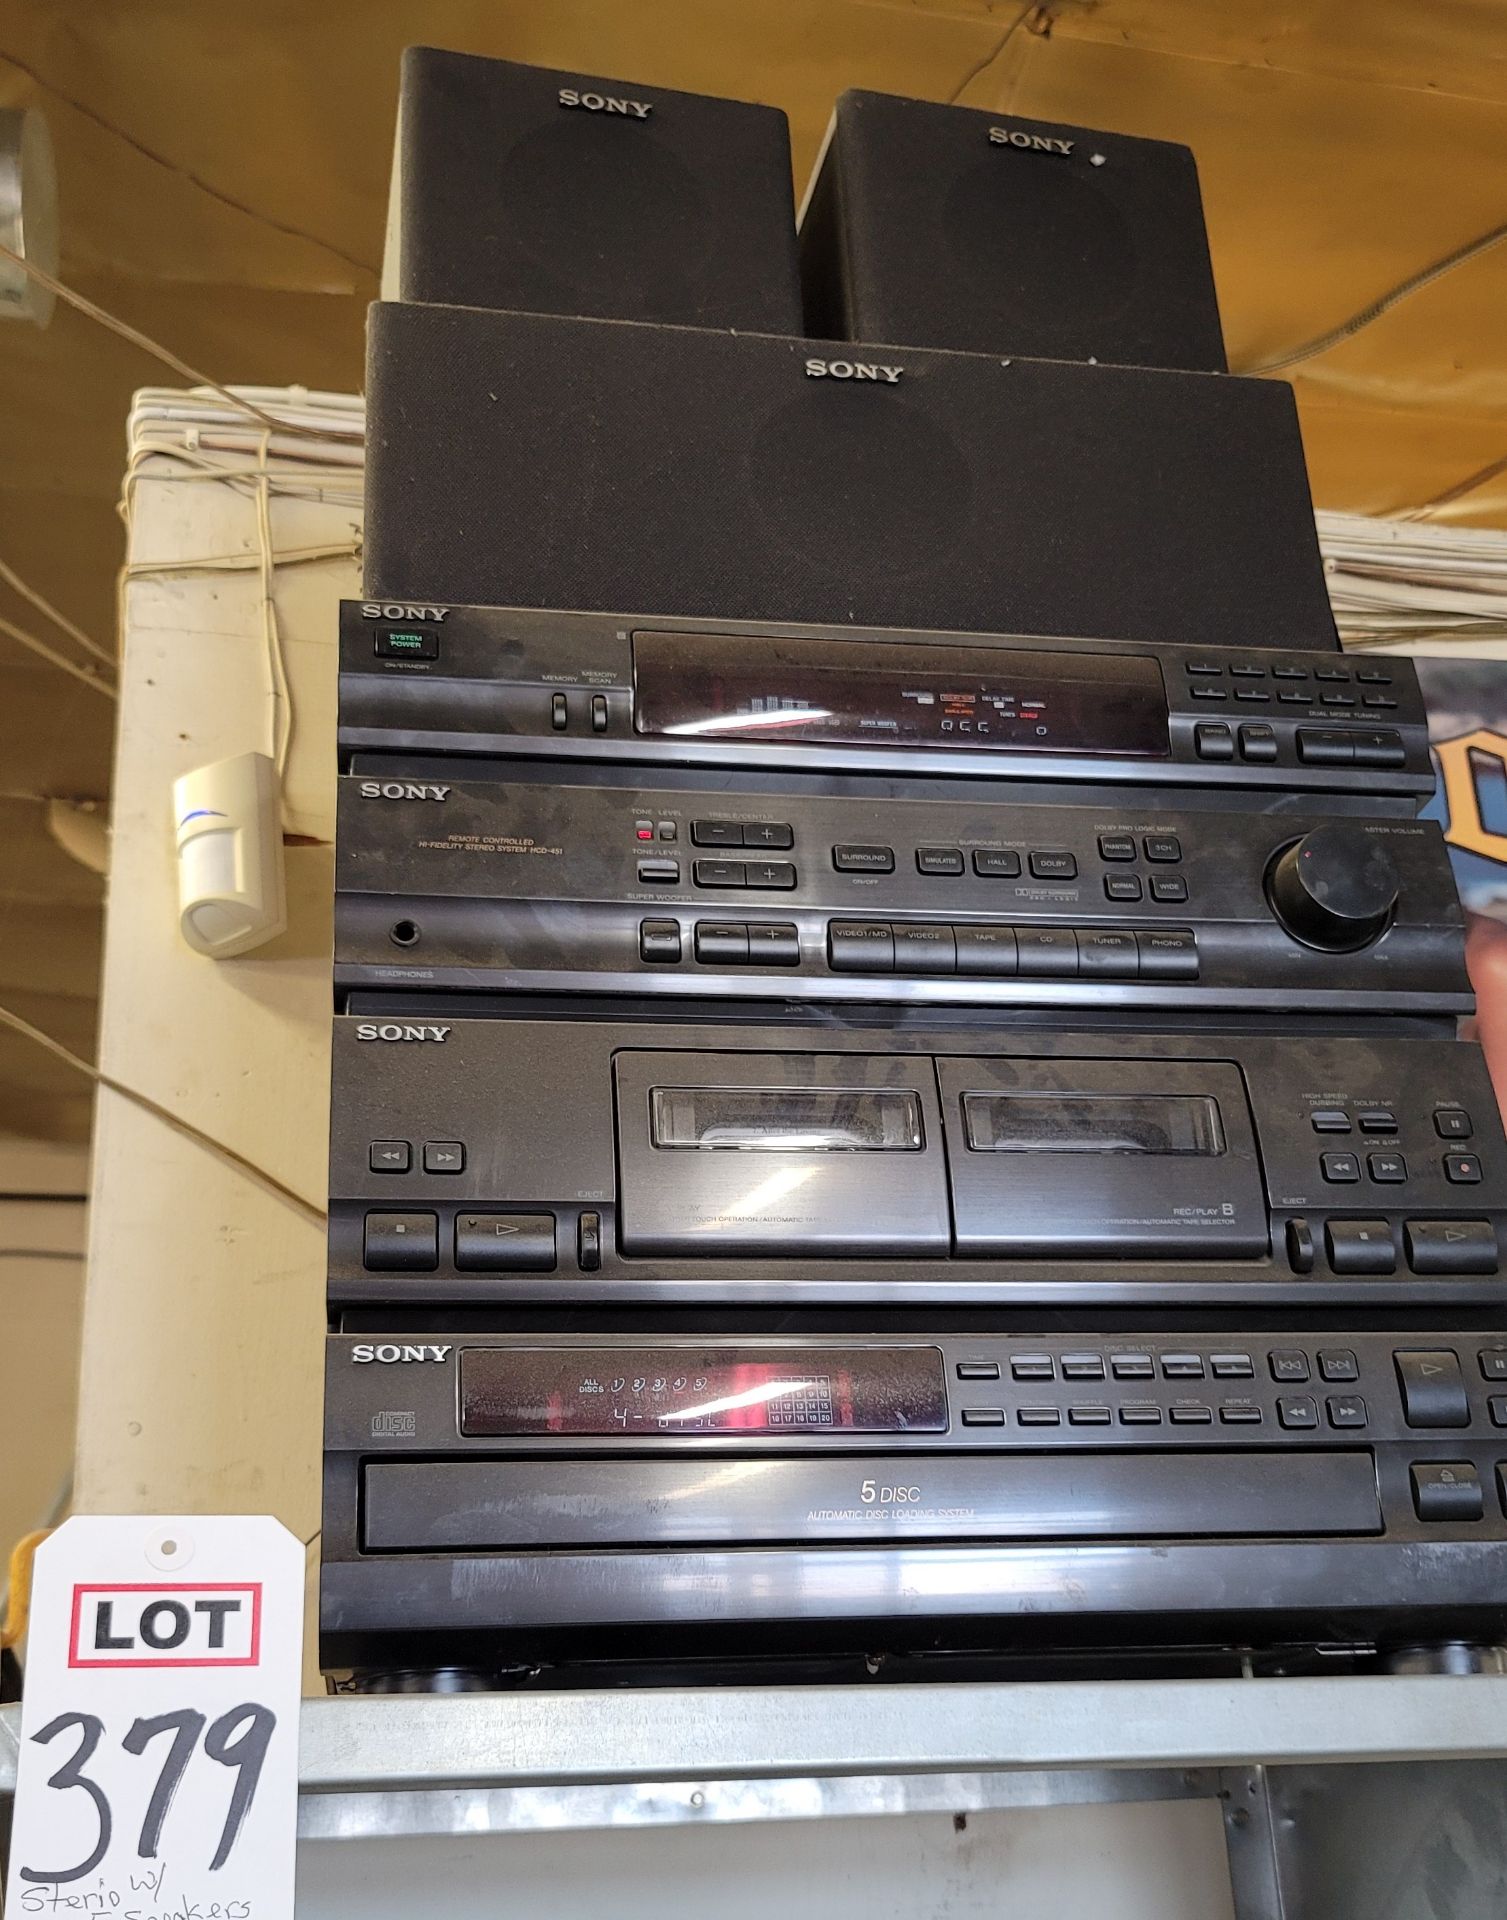 SONY STEREO SYSTEM W/ DUAL CASSETTE AND 5-DISC CD CHANGER